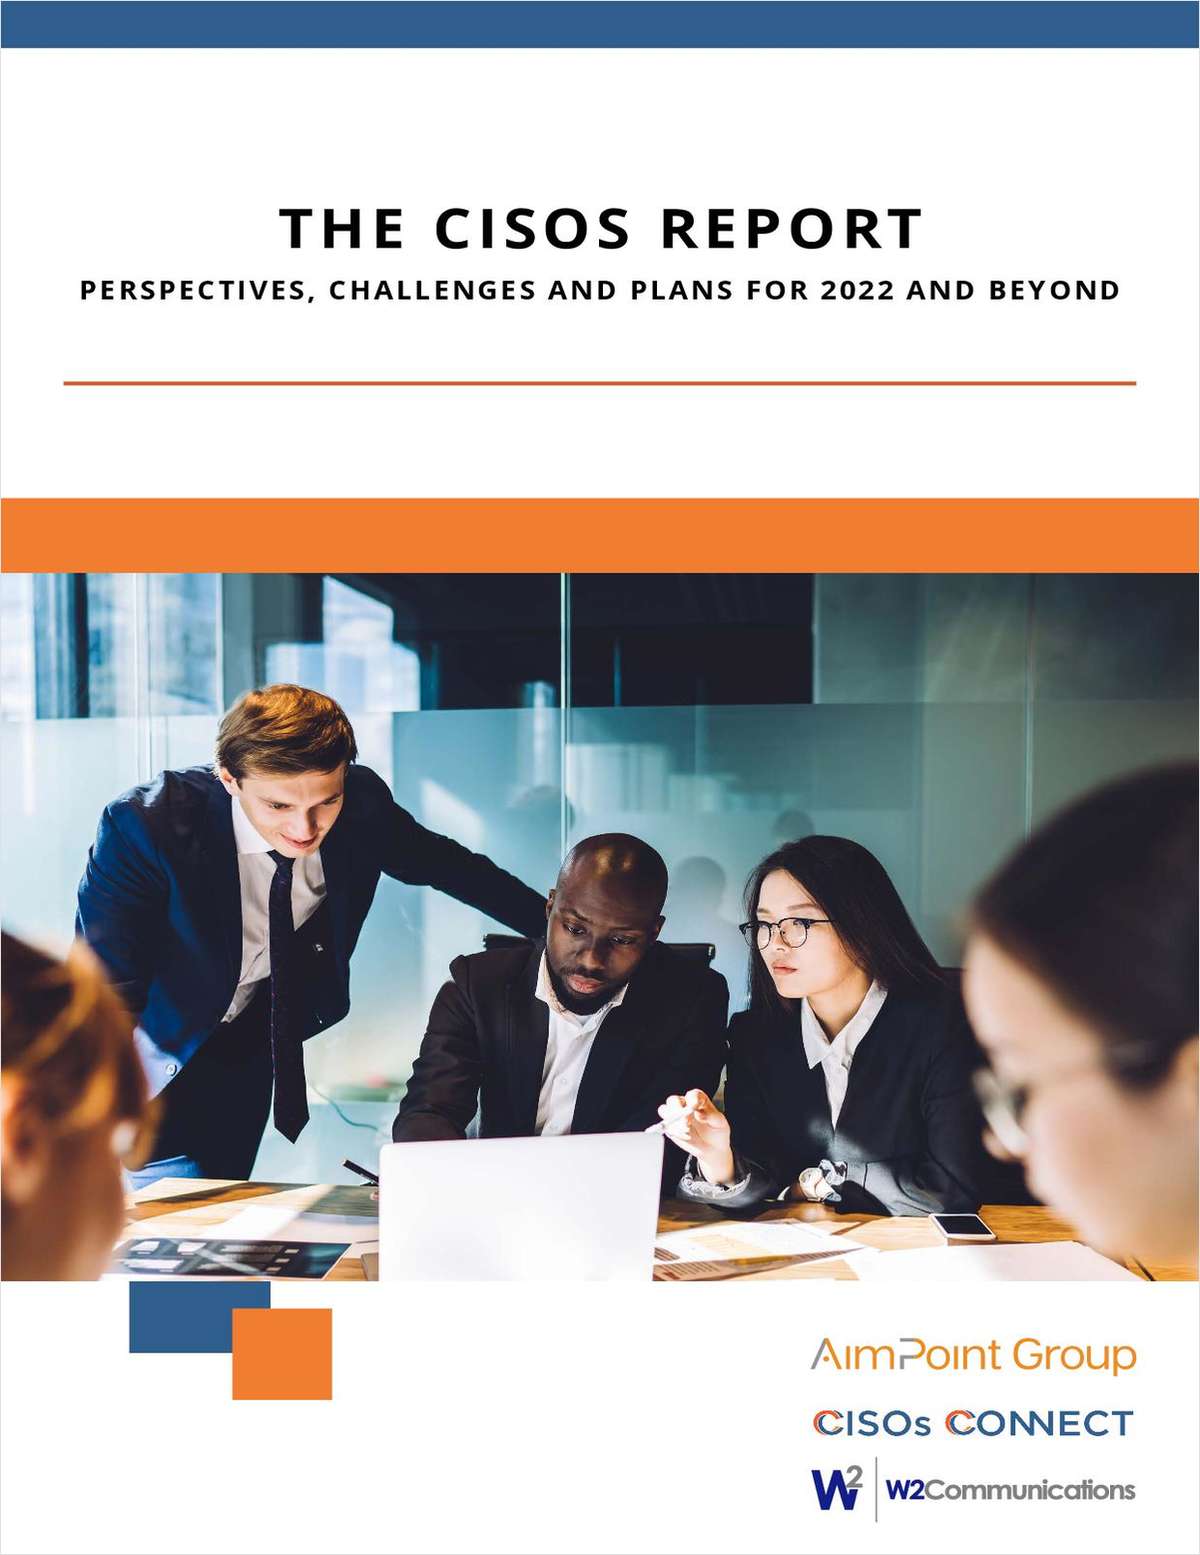 The CISOs Report Perspectives, Challenges and Plans for 2022 and Beyond